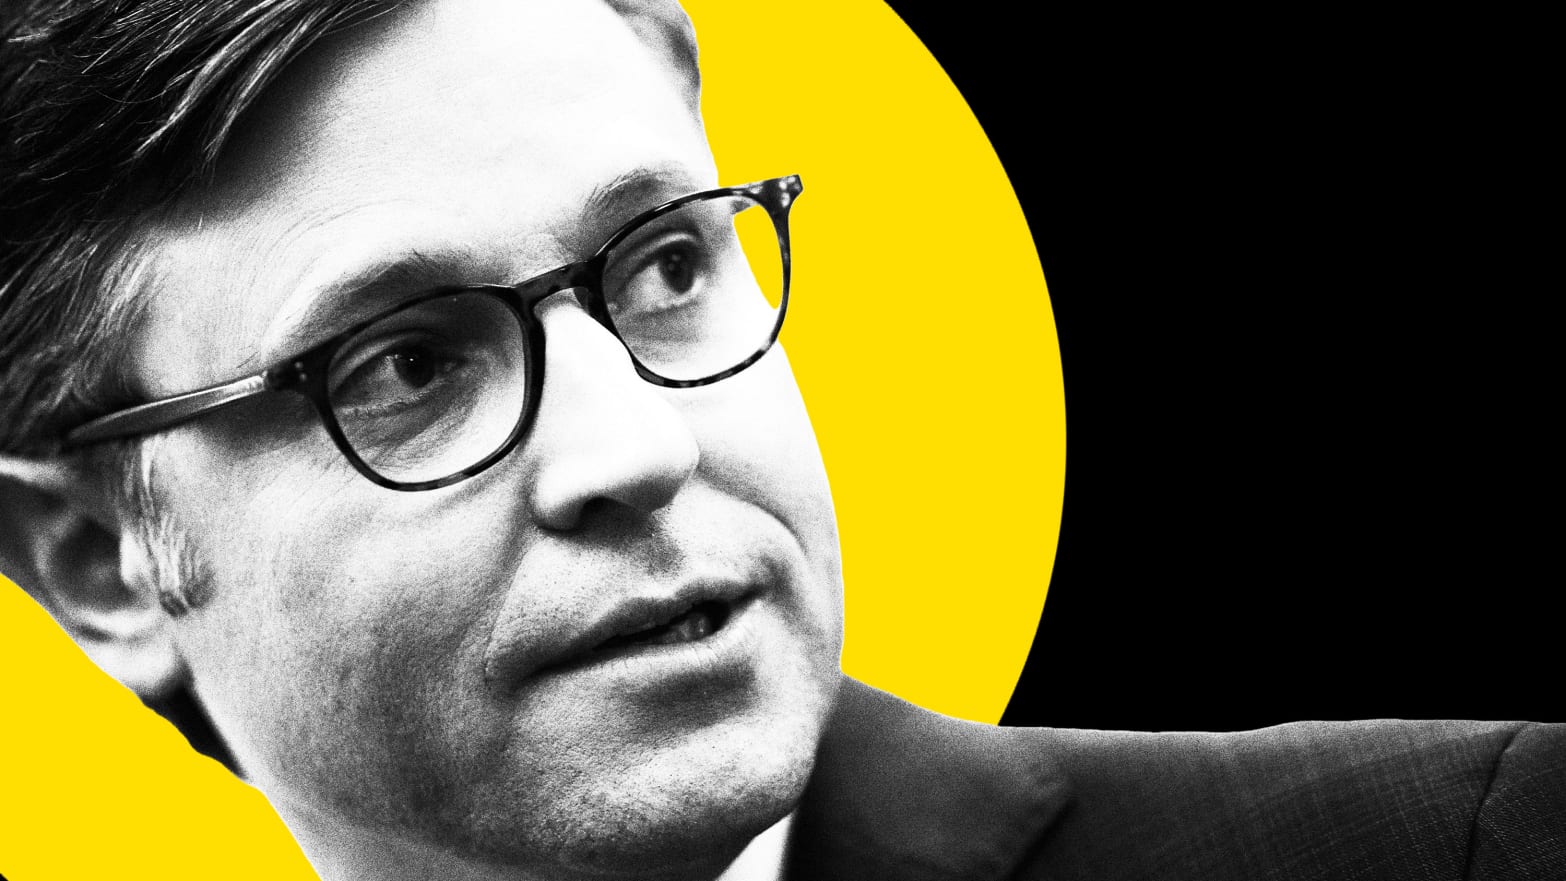 Photo illustration of Mike Johnson with a yellow circle behind him and a black background.